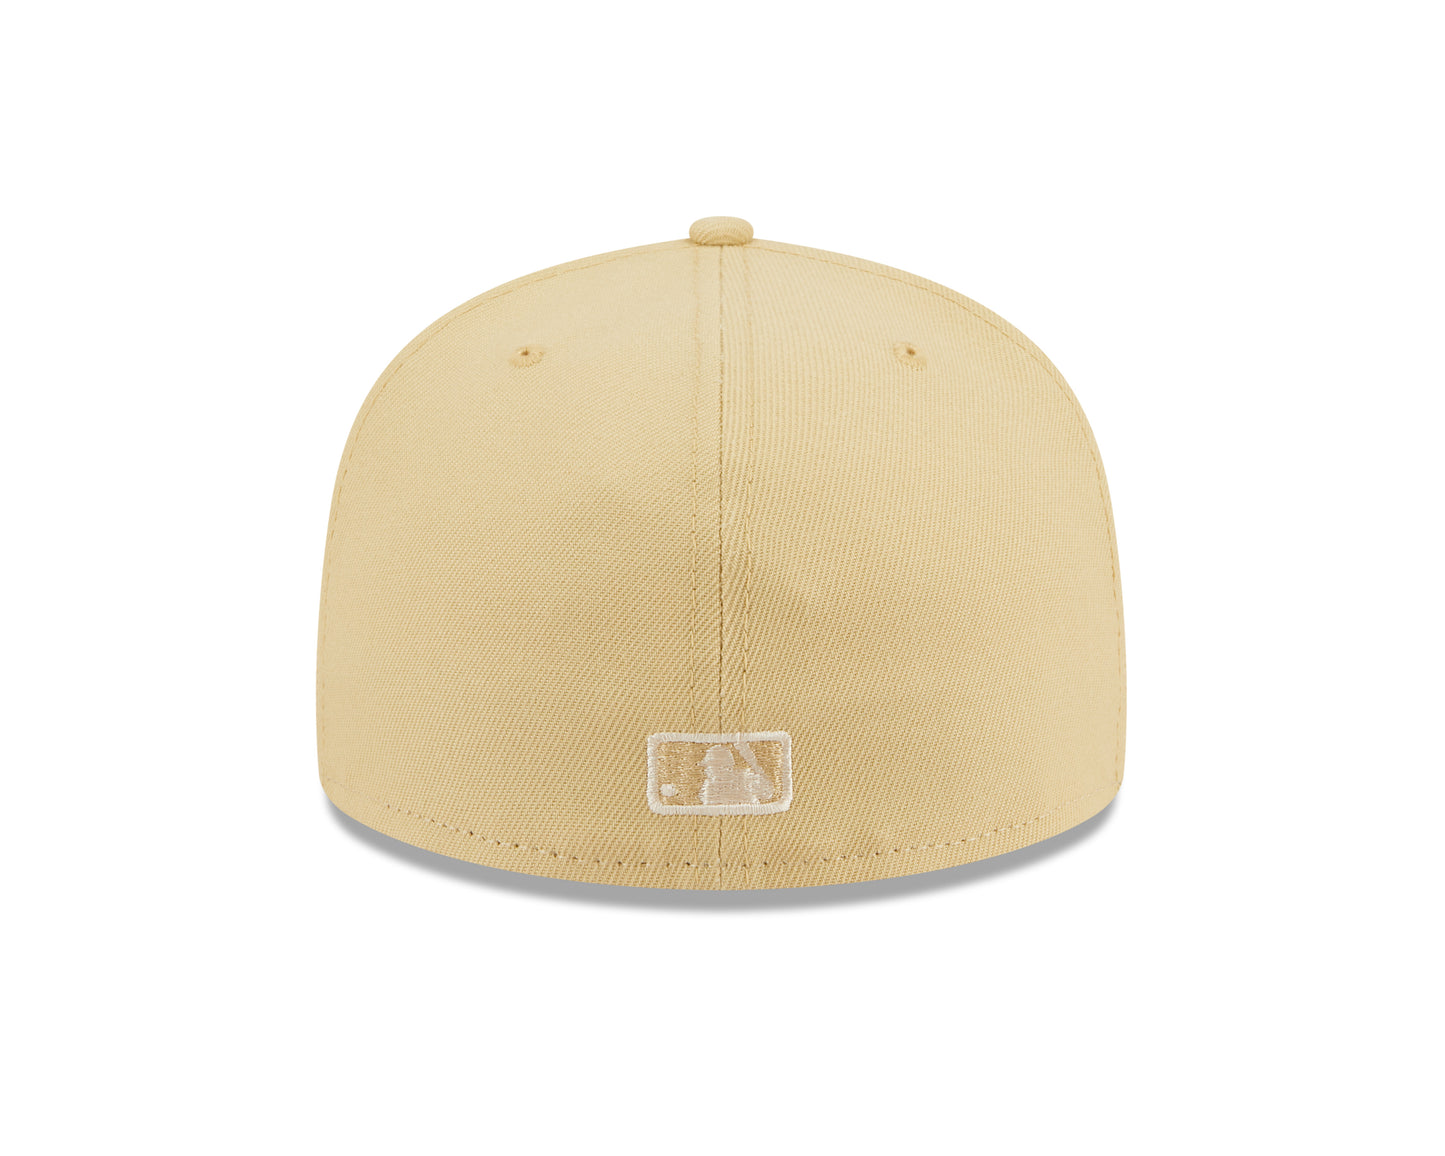 New Era - 59Fifty Fitted Cap - RAFFIA FRONT - New York Yankees - Sand - Headz Up 